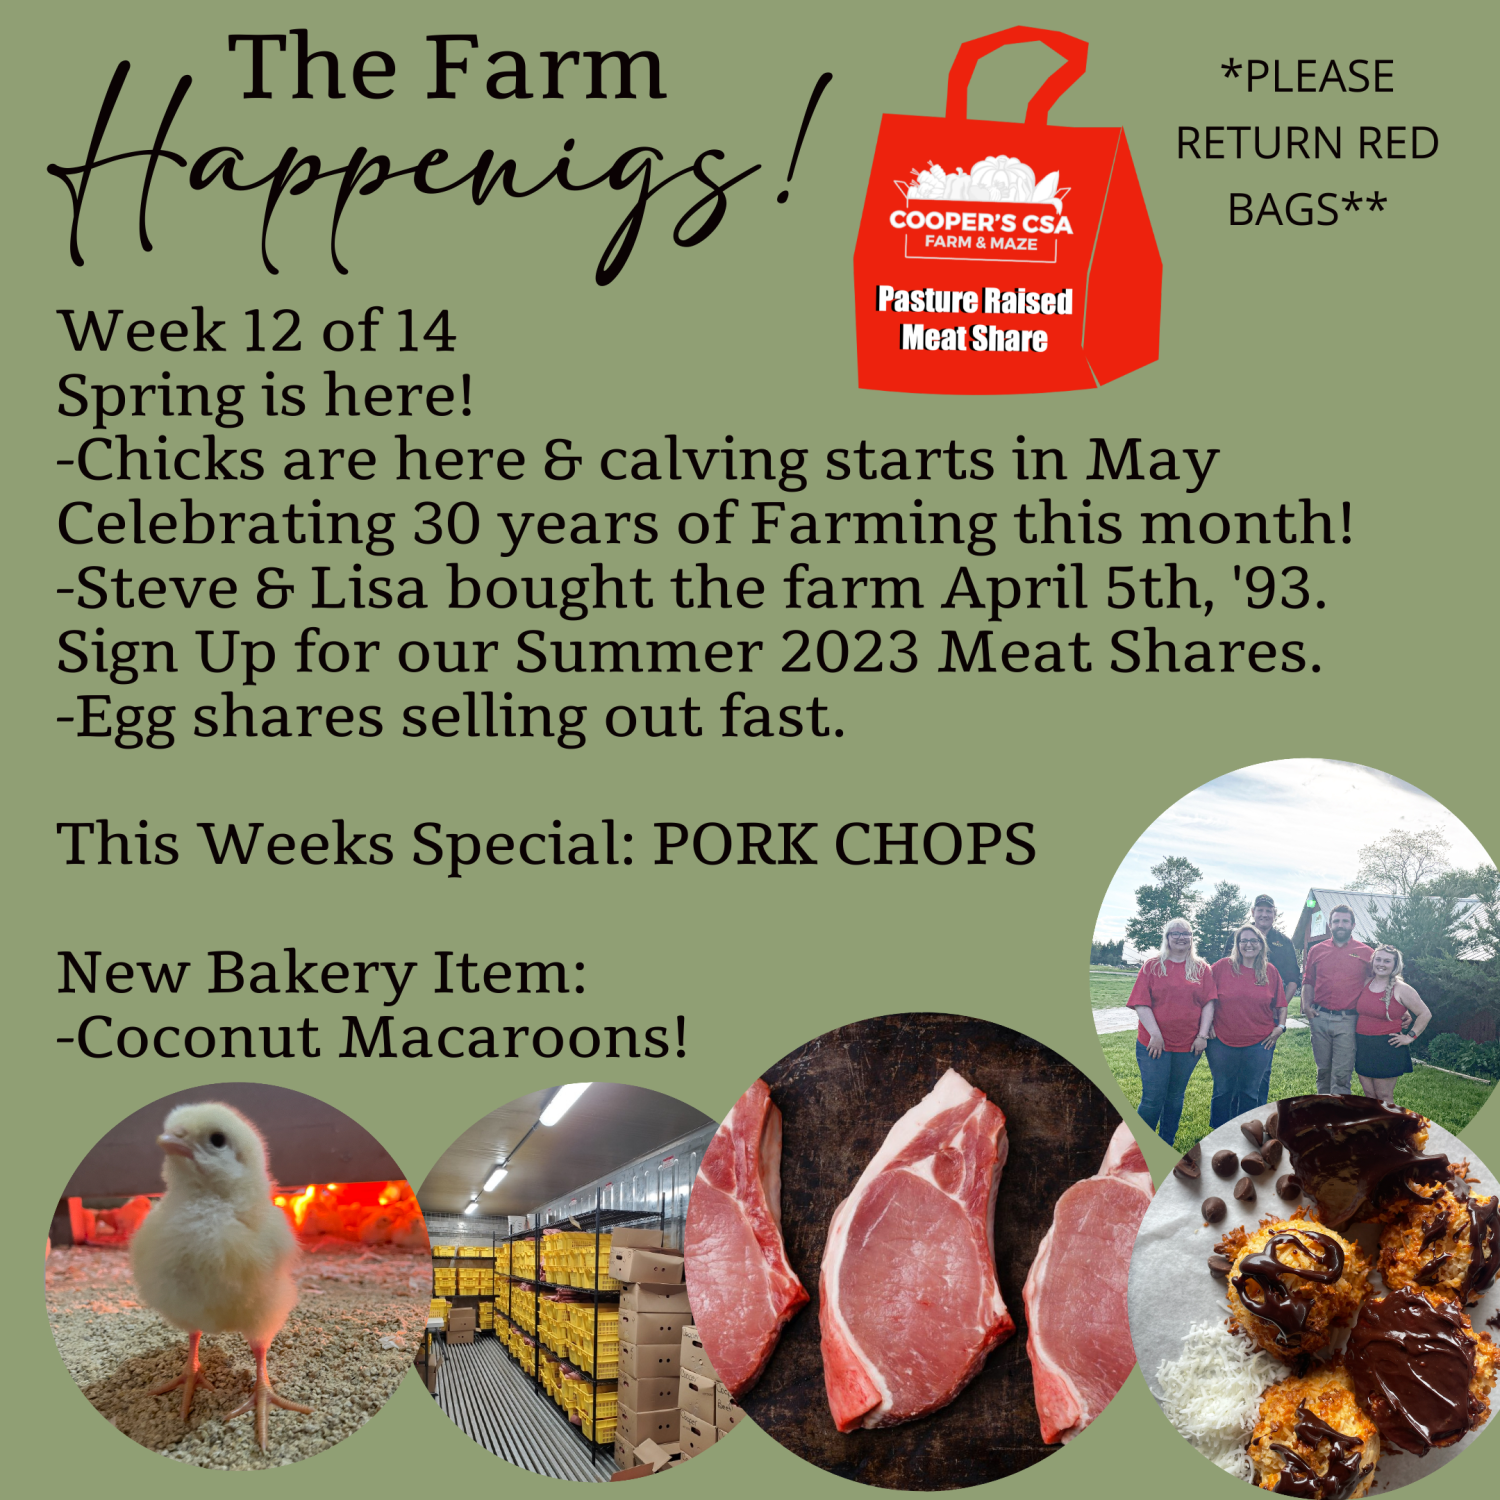 Previous Happening: "Pasture Meat Shares"-Coopers CSA Farm Farm Happenings Winter/Spring Week 12